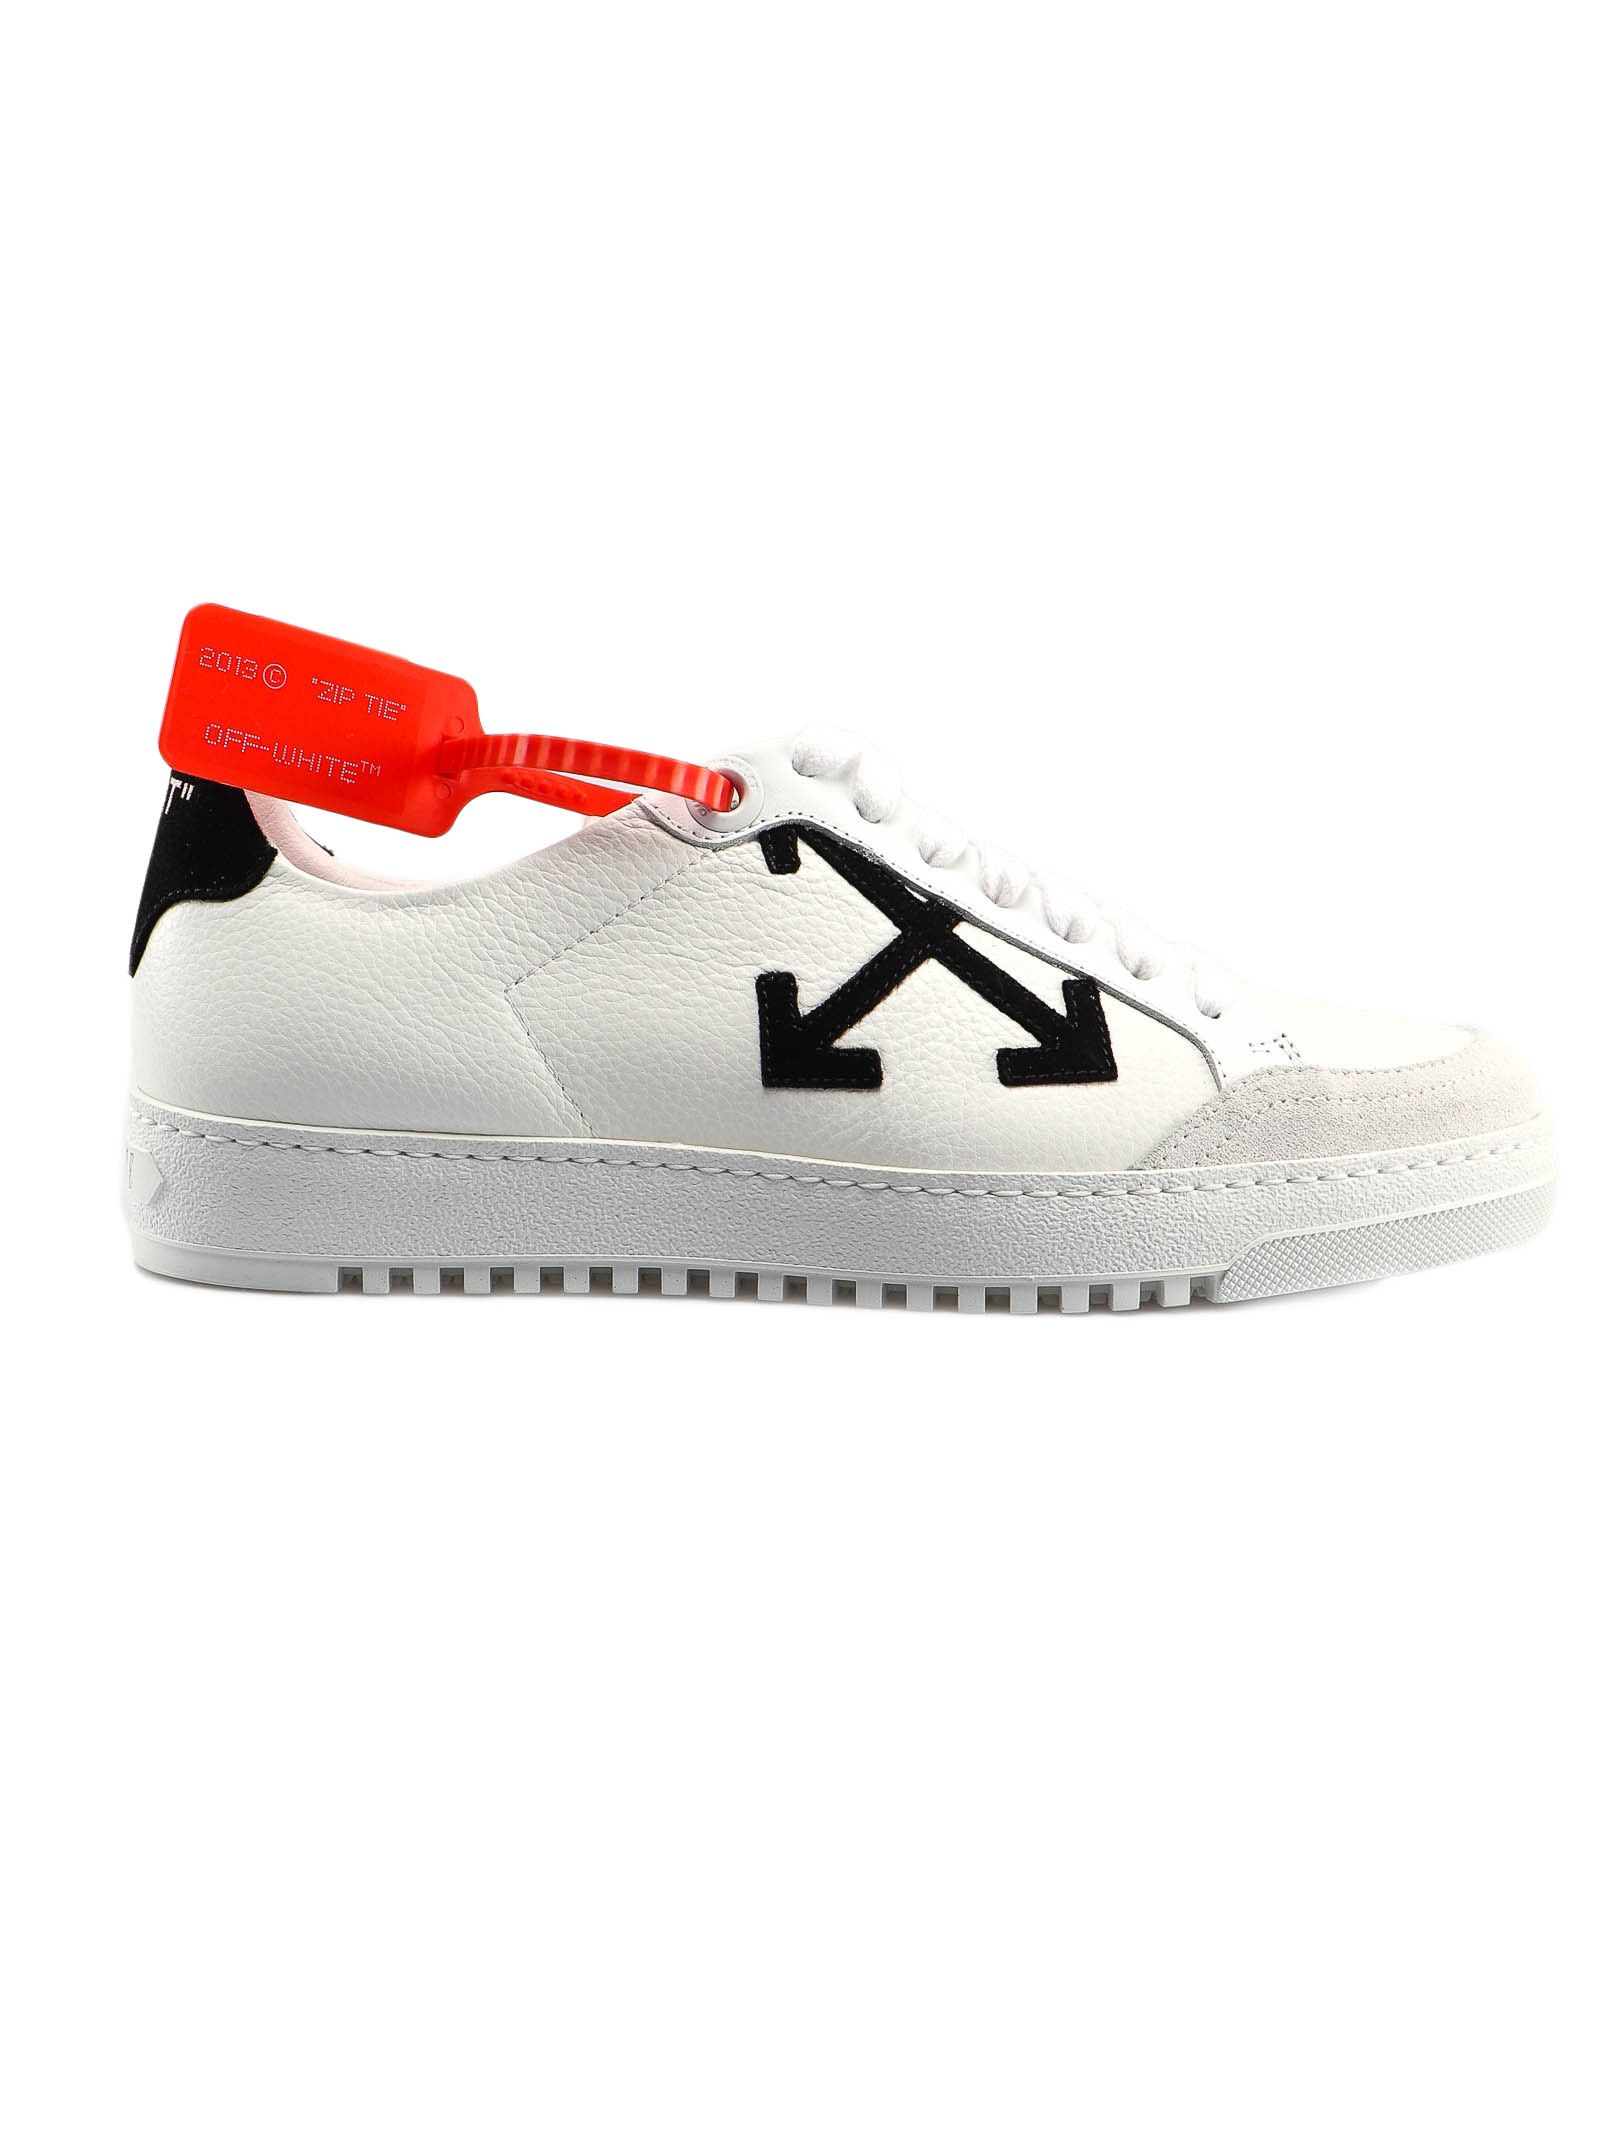 OFF-WHITE CLASSIC SNEAKERS,10866851